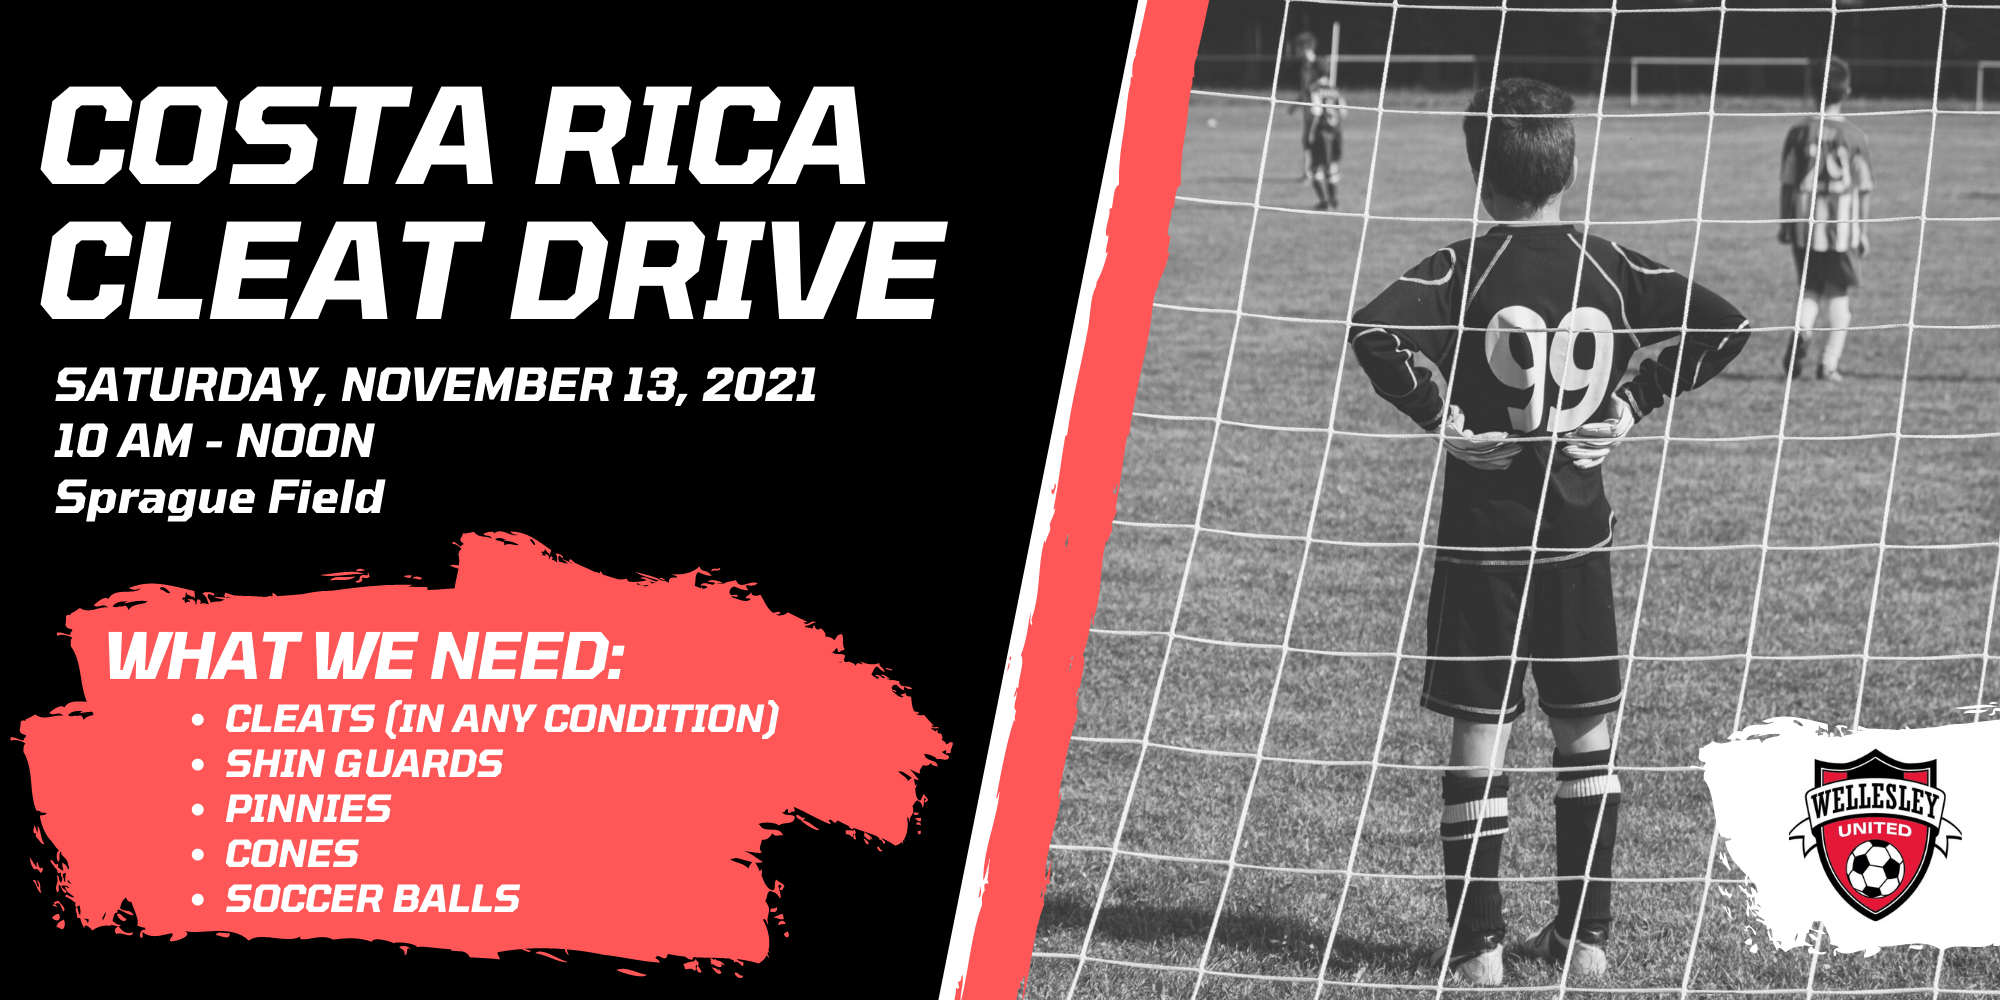 Wellesley United - Costa Rica - Cleat Drive